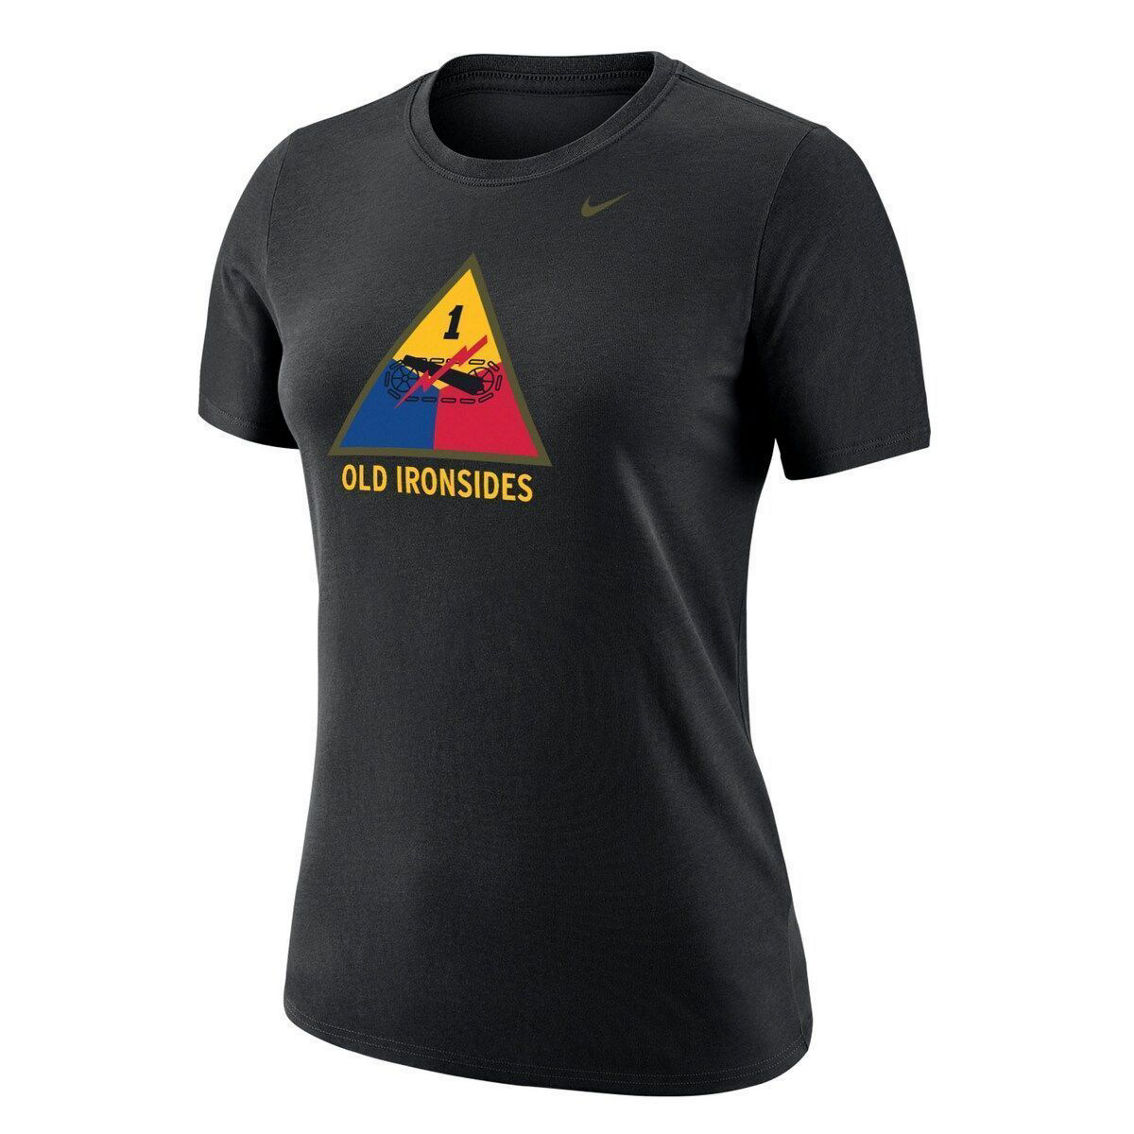 Nike Women's Black Army Black Knights 1st Armored Division Old Ironsides Operation Torch T-Shirt - Image 3 of 4